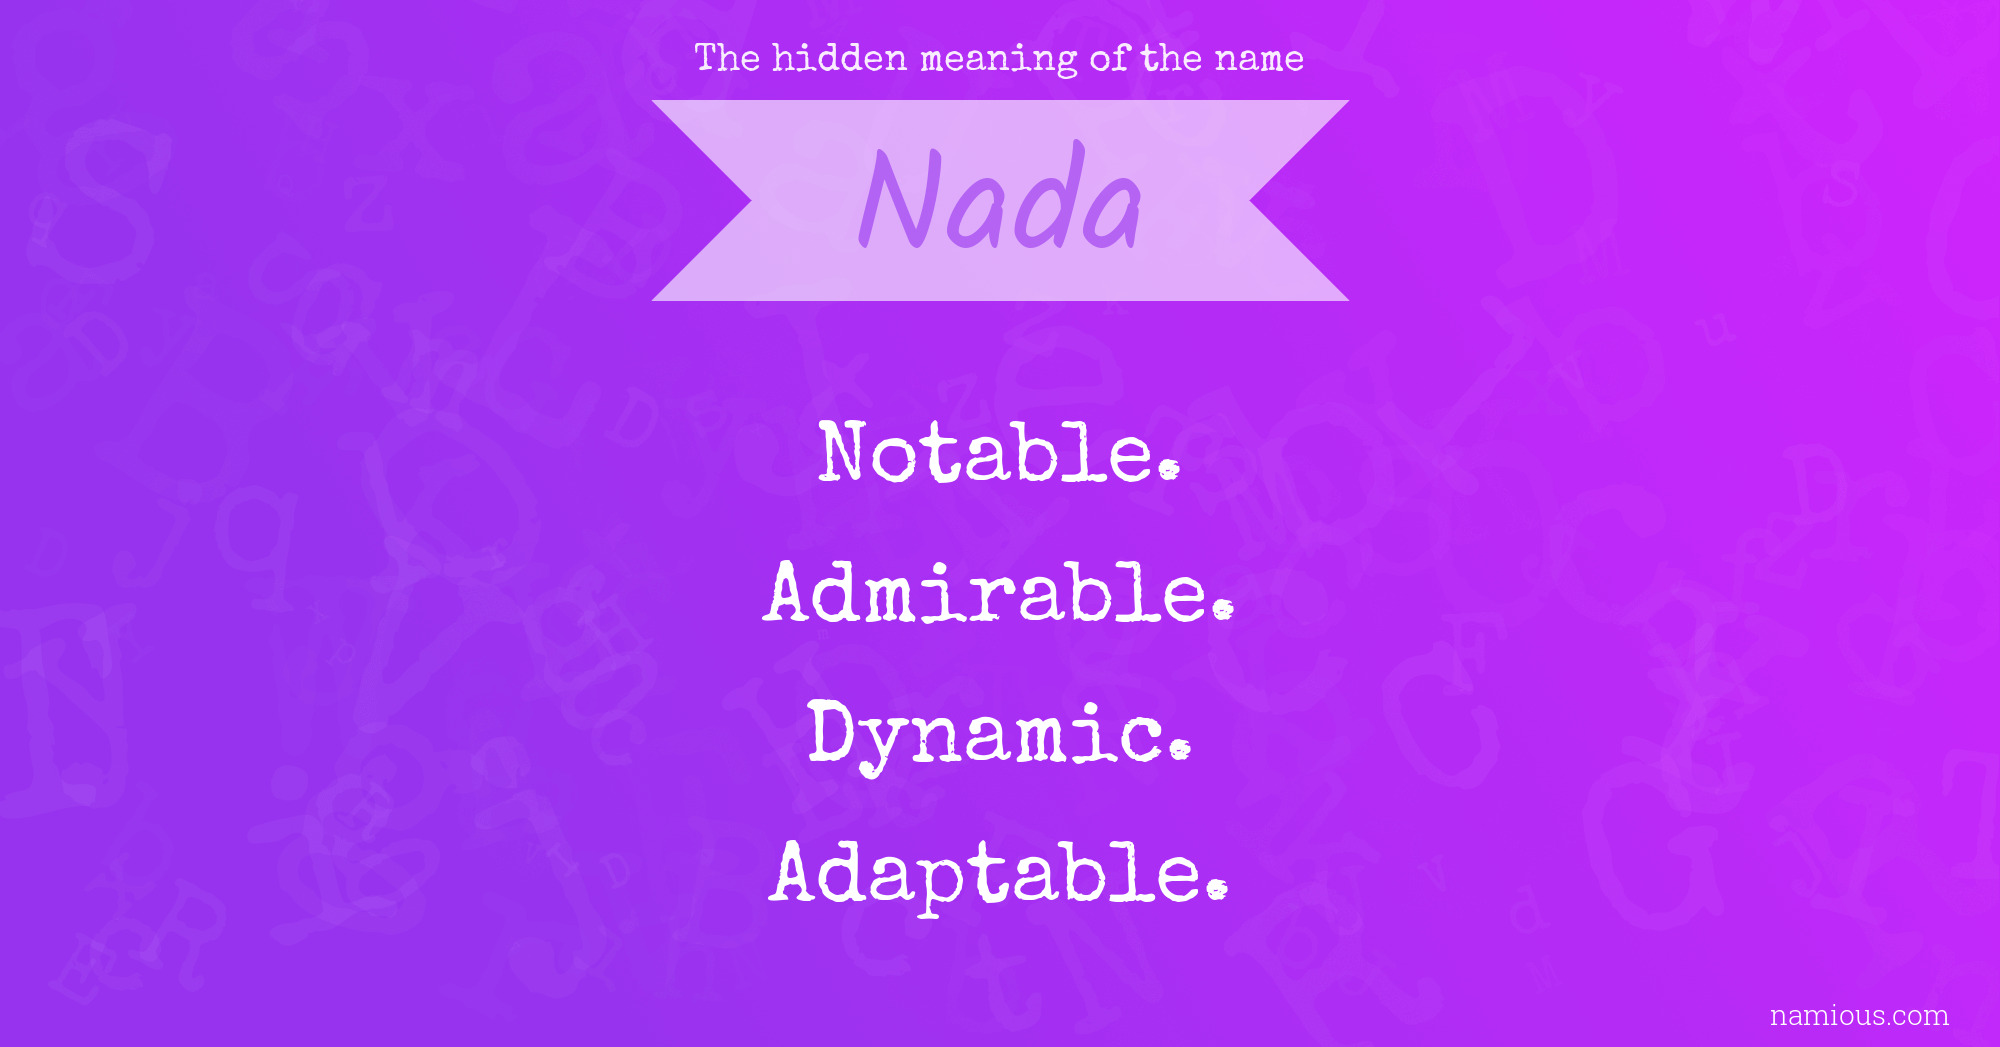 The hidden meaning of the name Nada Namious